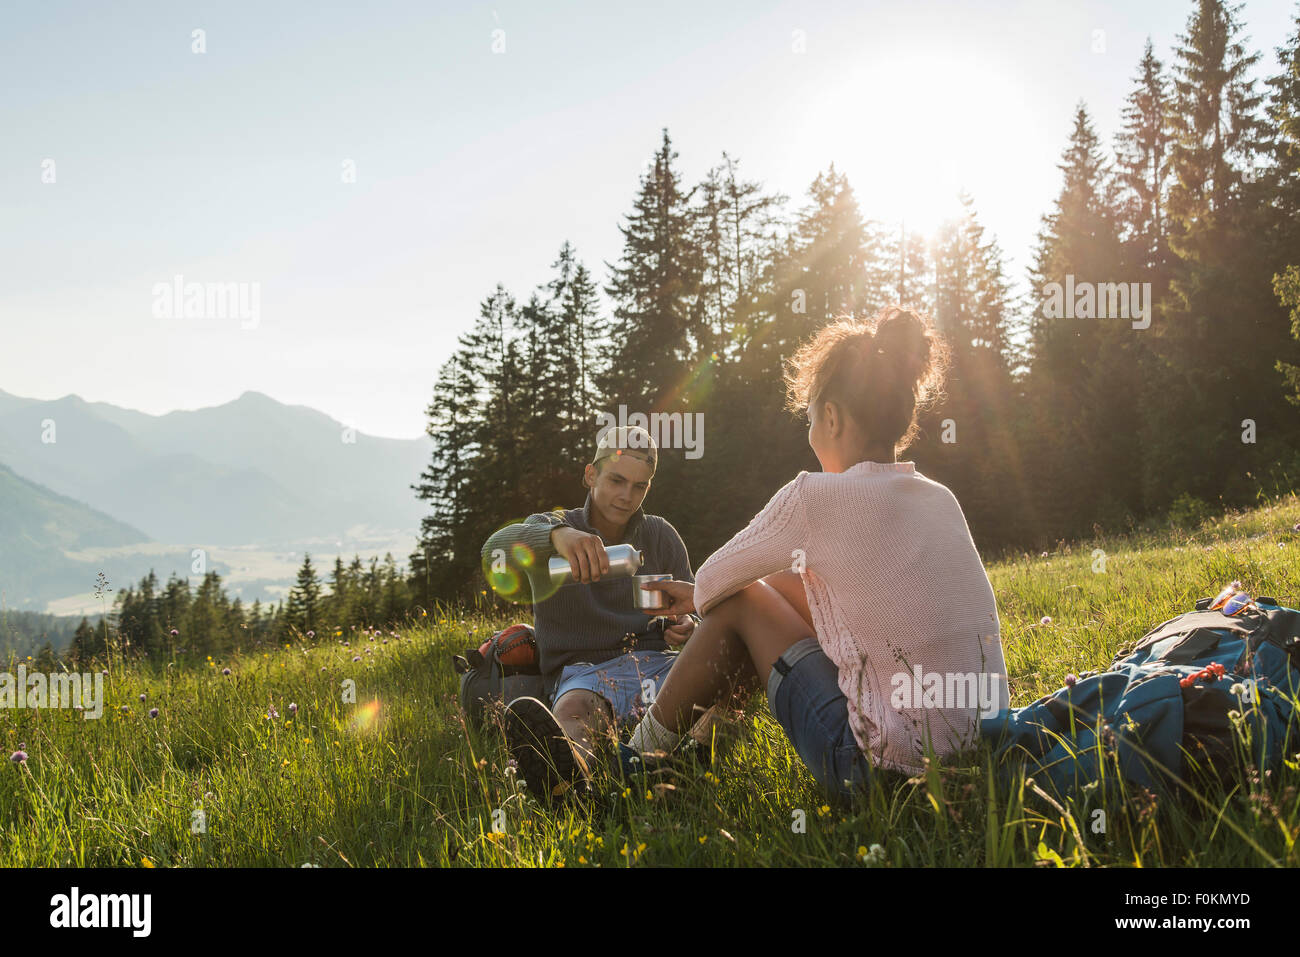 Austria, Tyrol, Tannheimer Tal, young couple resting on alpine meadow Stock Photo